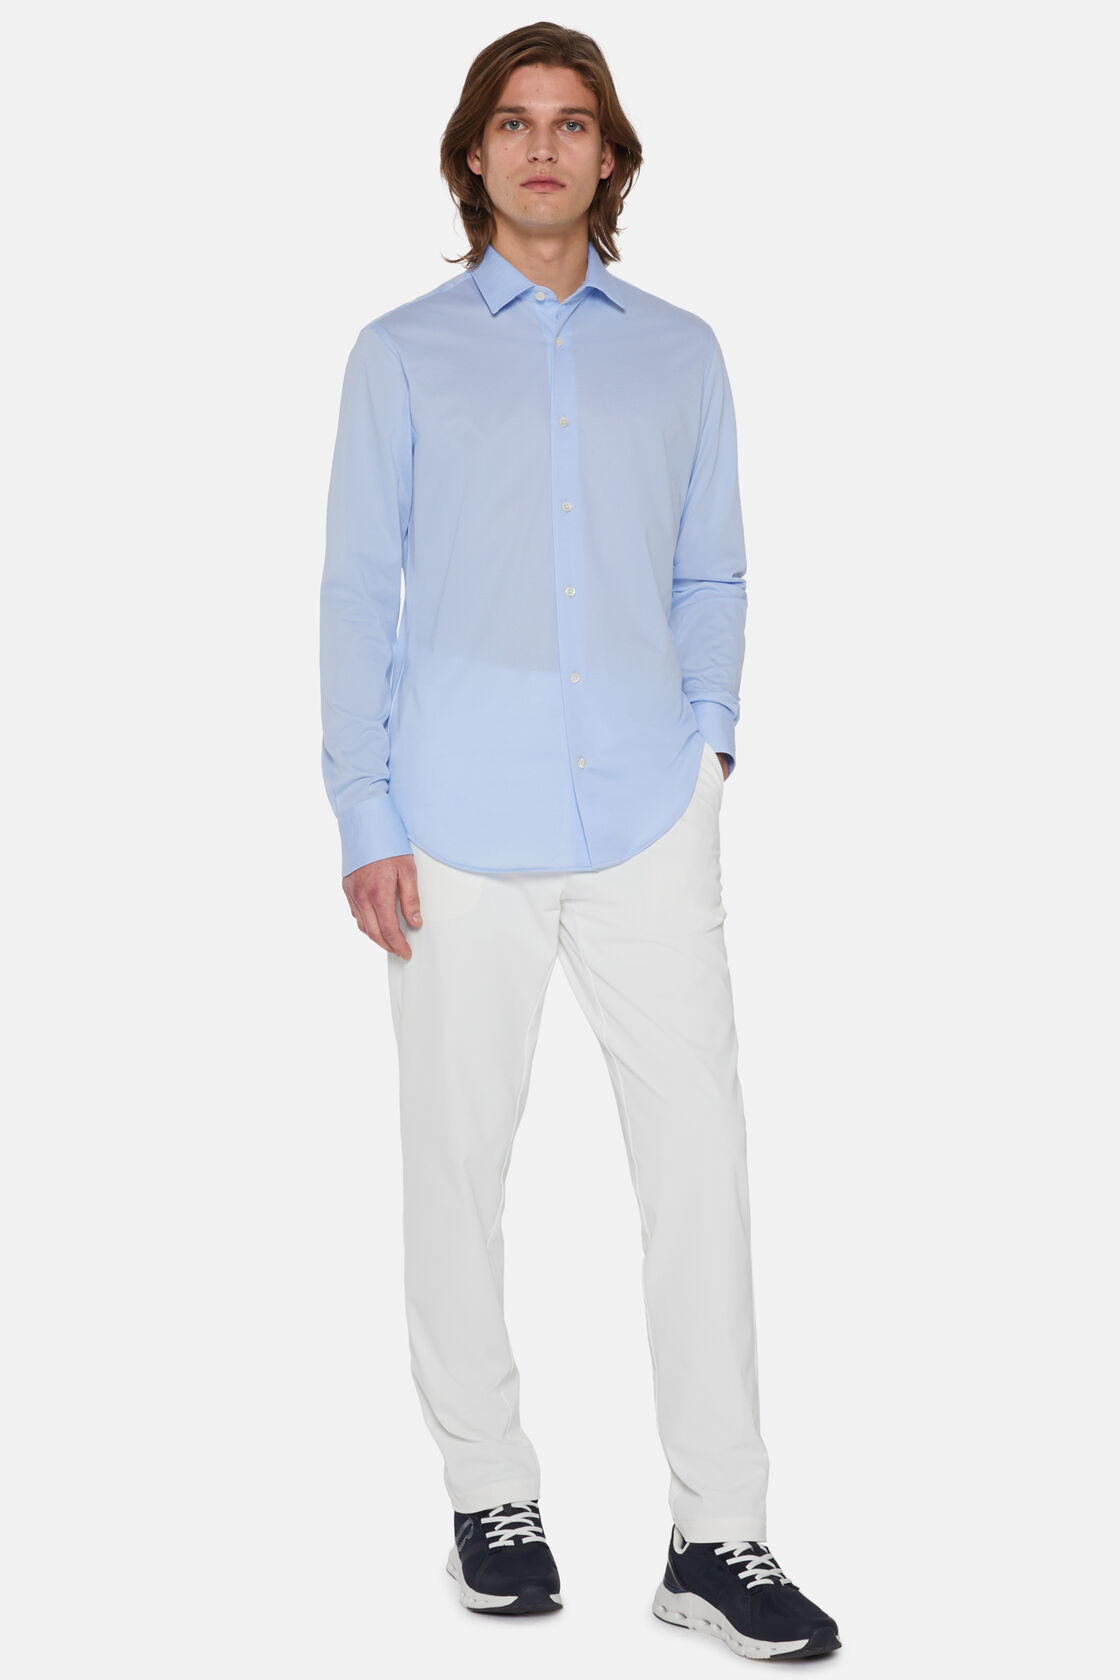 Slim Fit Blue Shirt in Cotton and COOLMAX®, Light Blue, hi-res